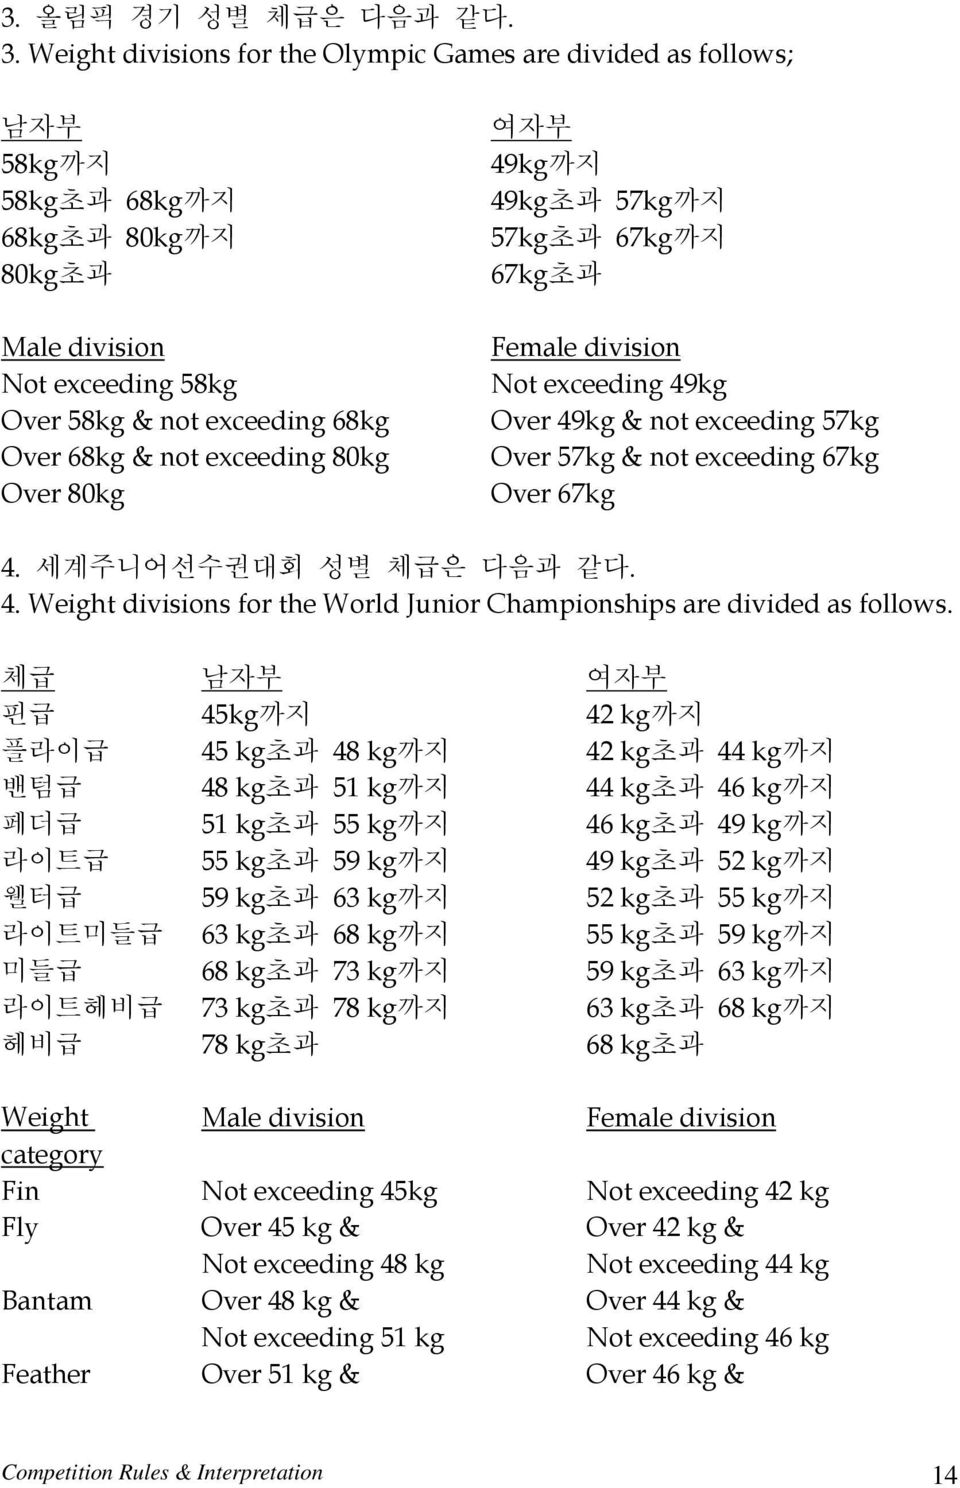 80kg Over 80kg 여자부 49kg까지 49kg초과 57kg까지 57kg초과 67kg까지 67kg초과 Female division Not exceeding 49kg Over 49kg & not exceeding 57kg Over 57kg & not exceeding 67kg Over 67kg 4. 세계주니어선수권대회 성별 체급은 다음과 같다. 4. Weight divisions for the World Junior Championships are divided as follows.